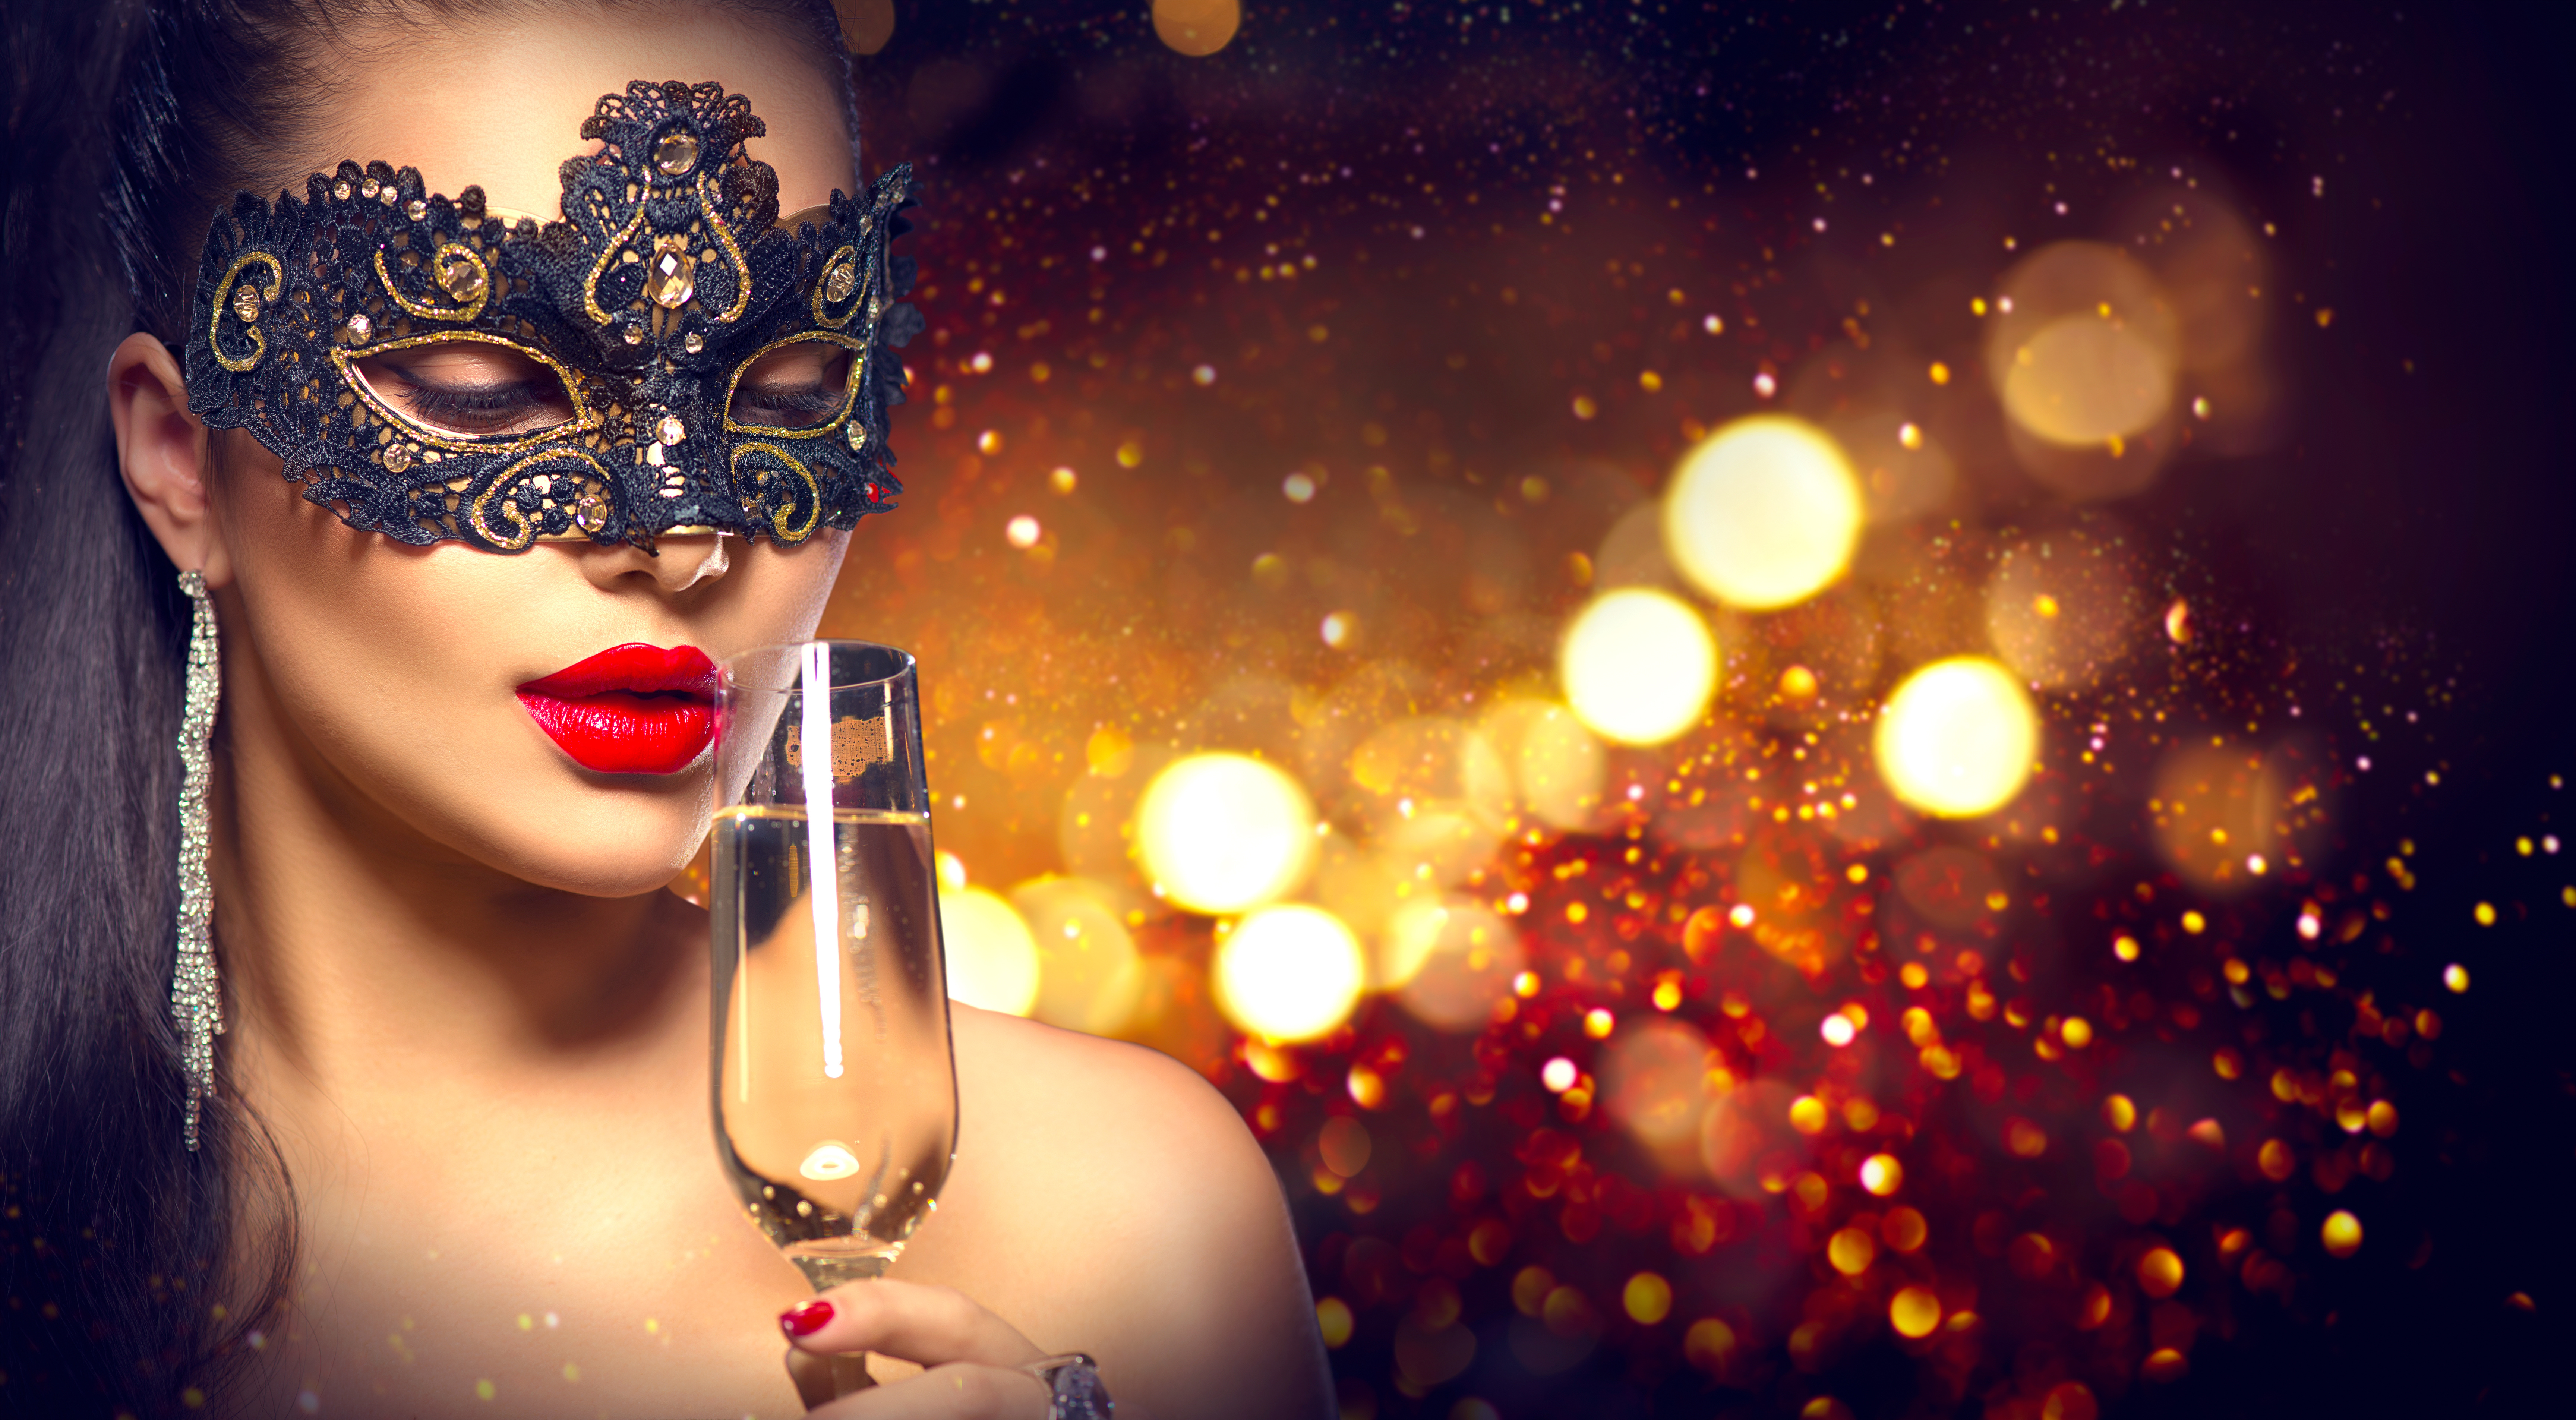 Sexy model woman with glass of champagne wearing venetian masque